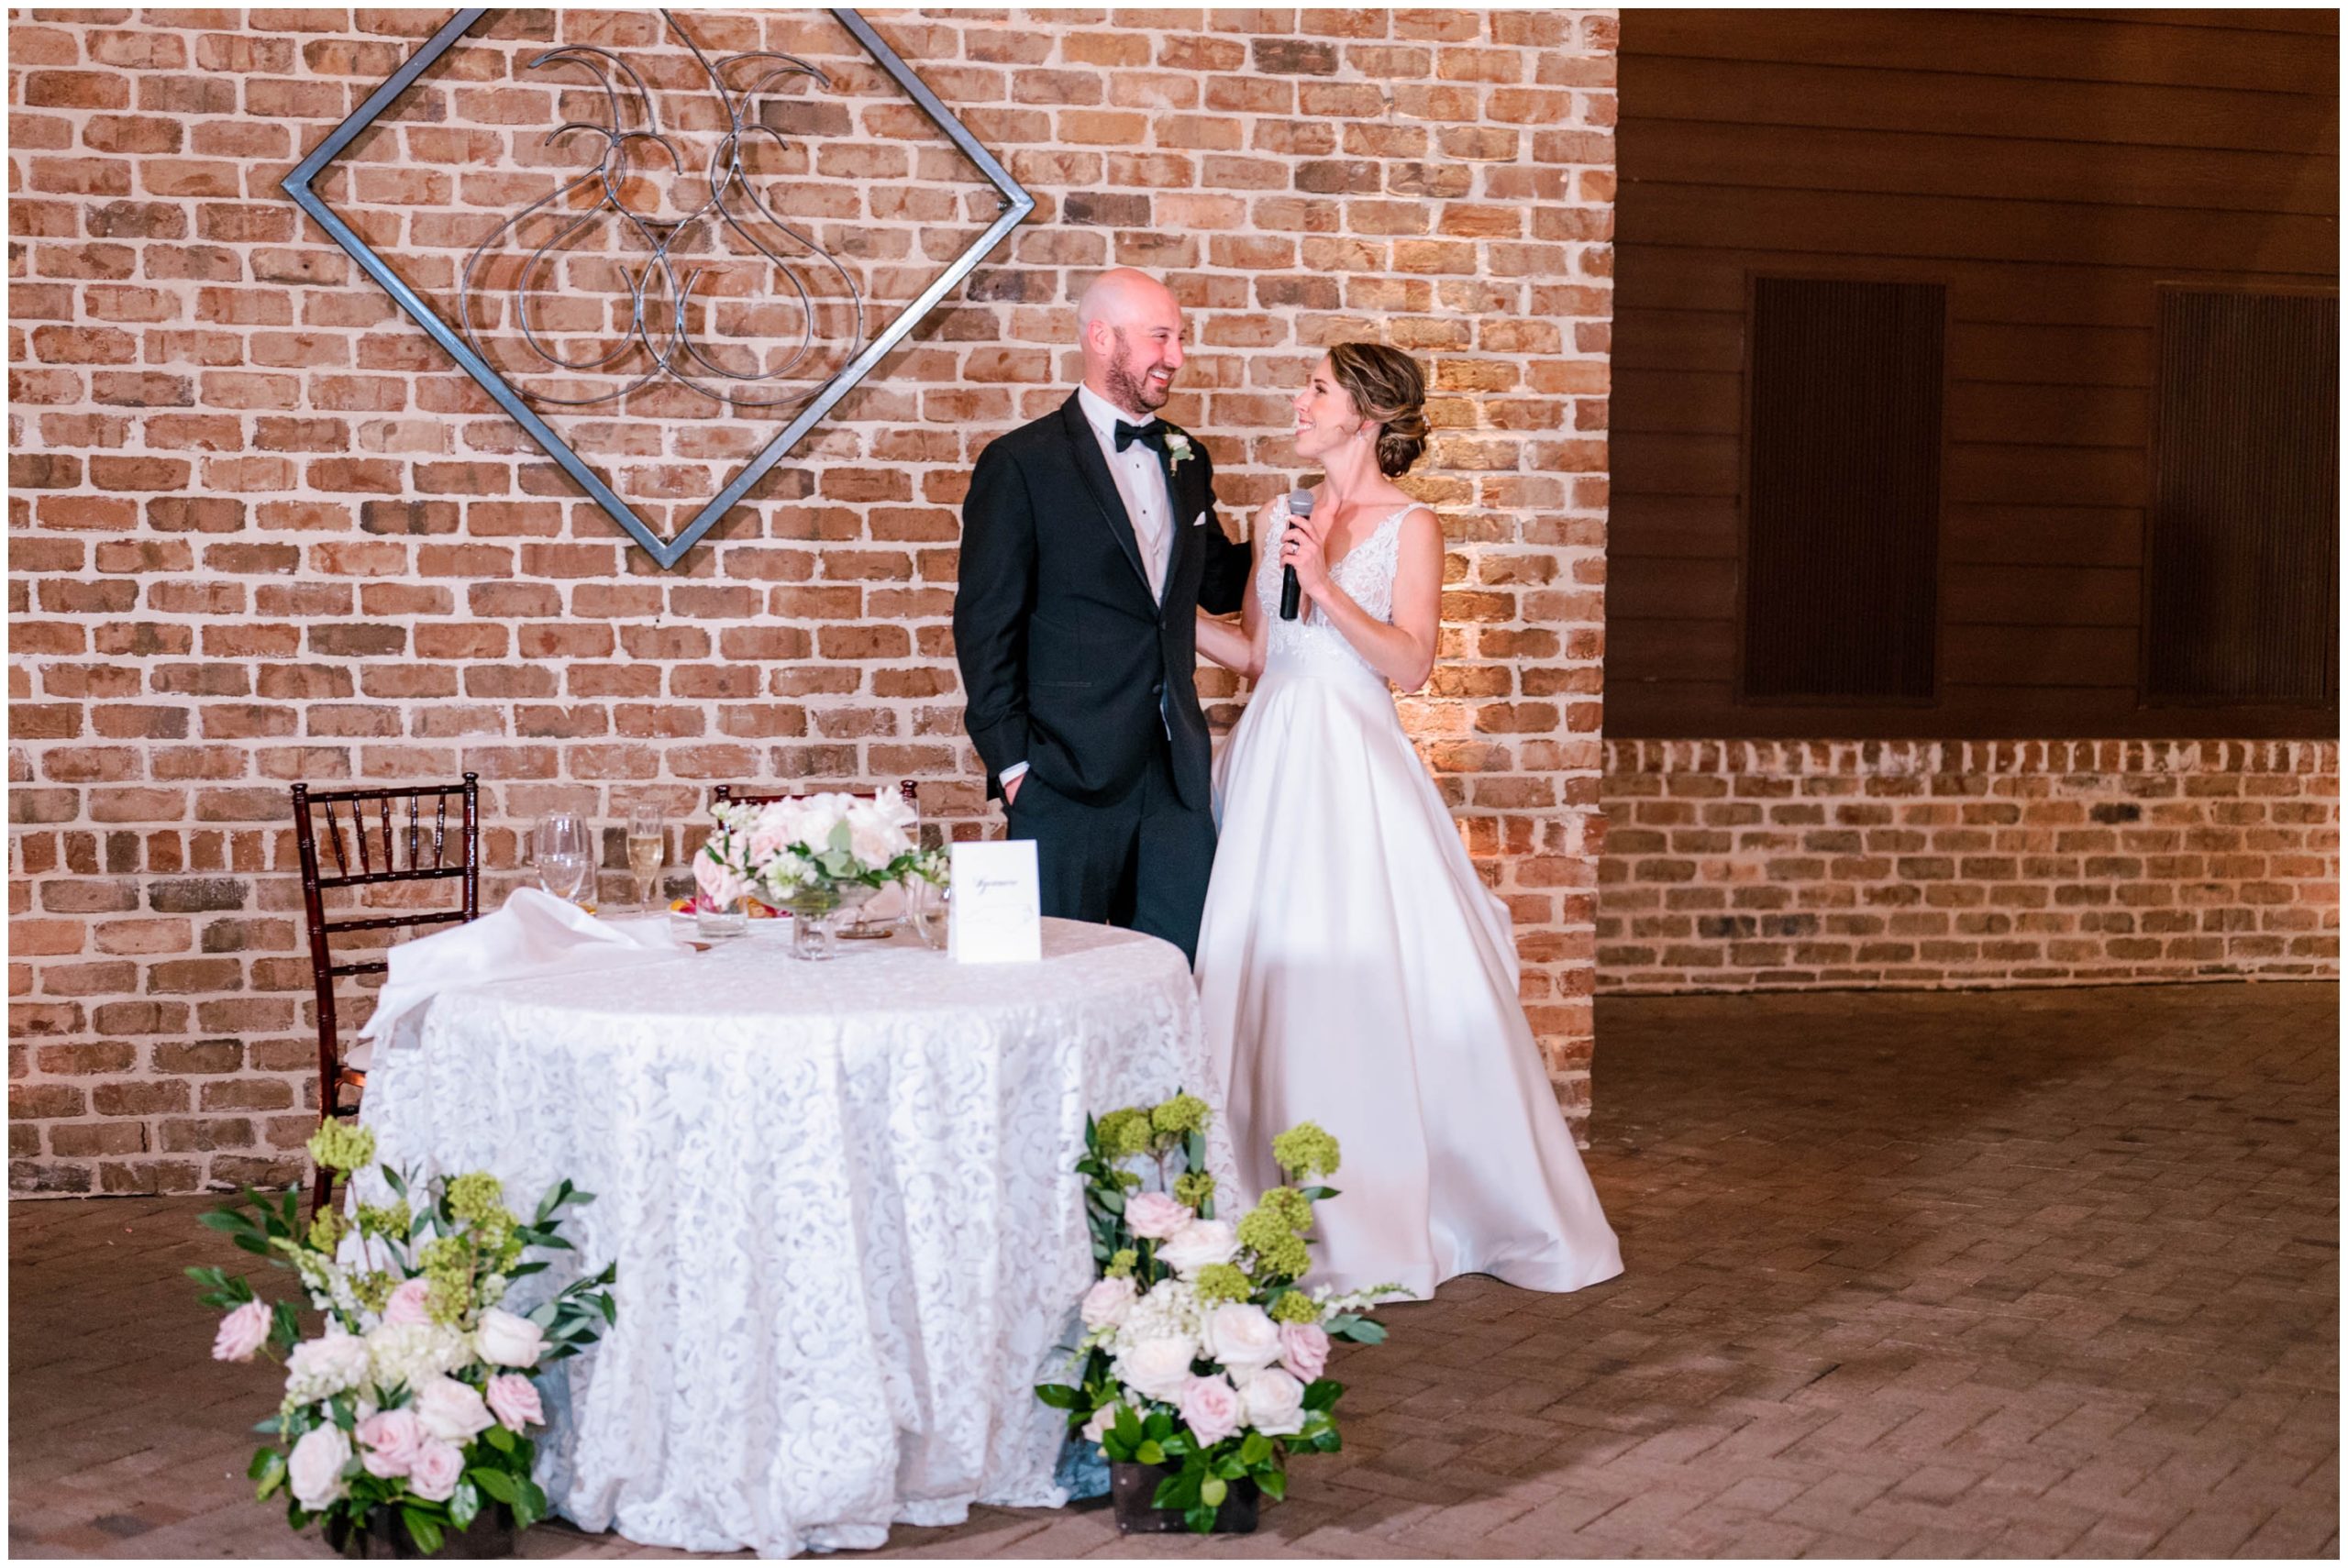 Indoor wedding reception in the event pavilion at The Sutherland